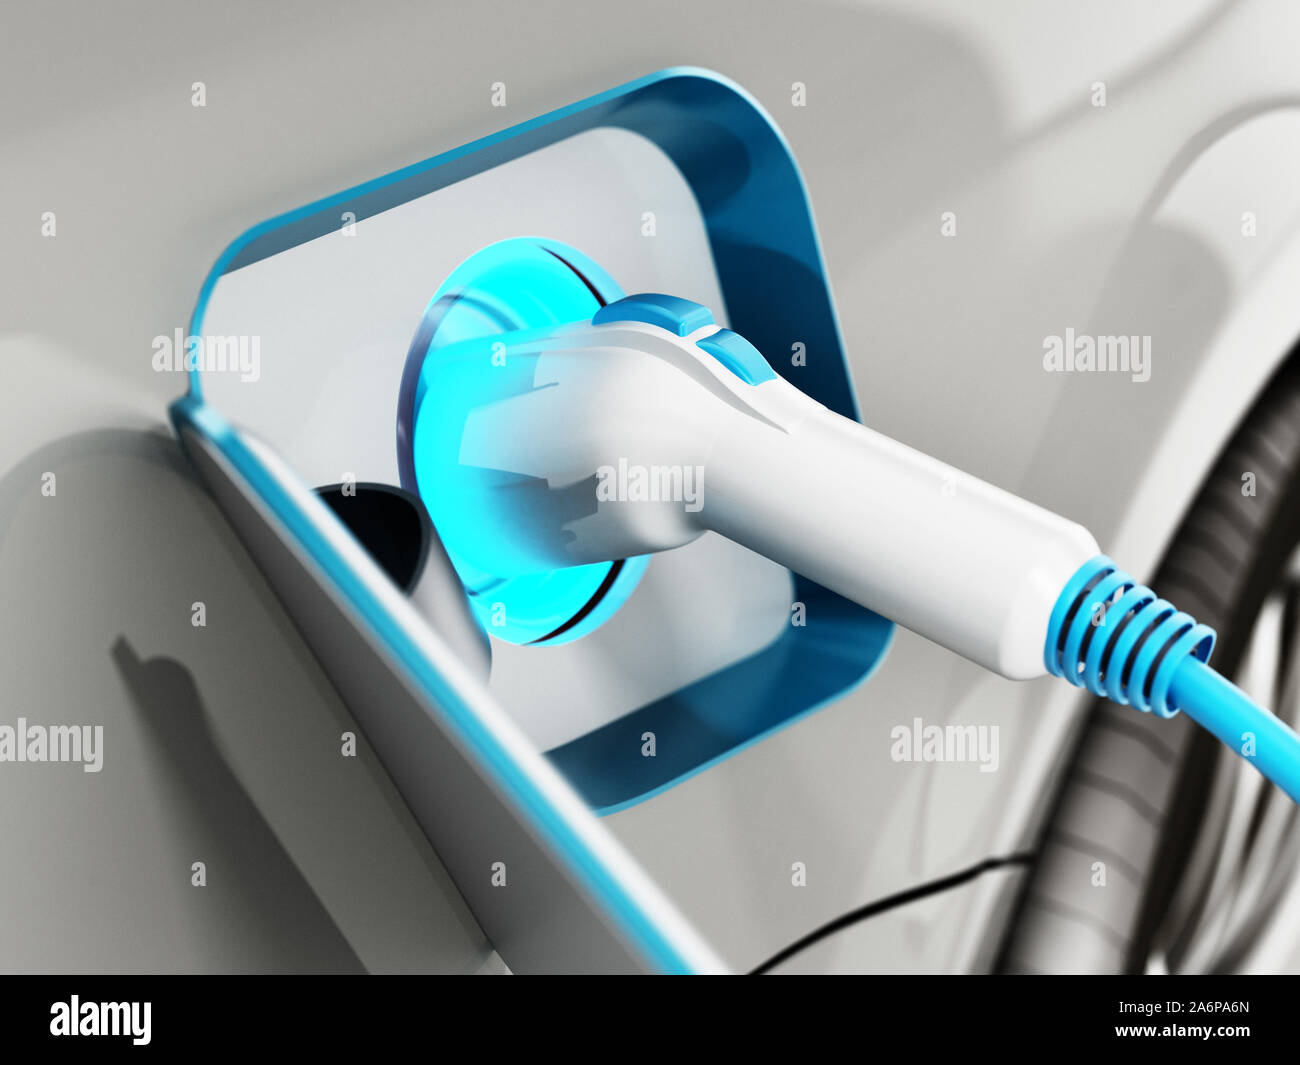 Plug-in hybrid or electric car being recharged. 3D illustration. Stock Photo